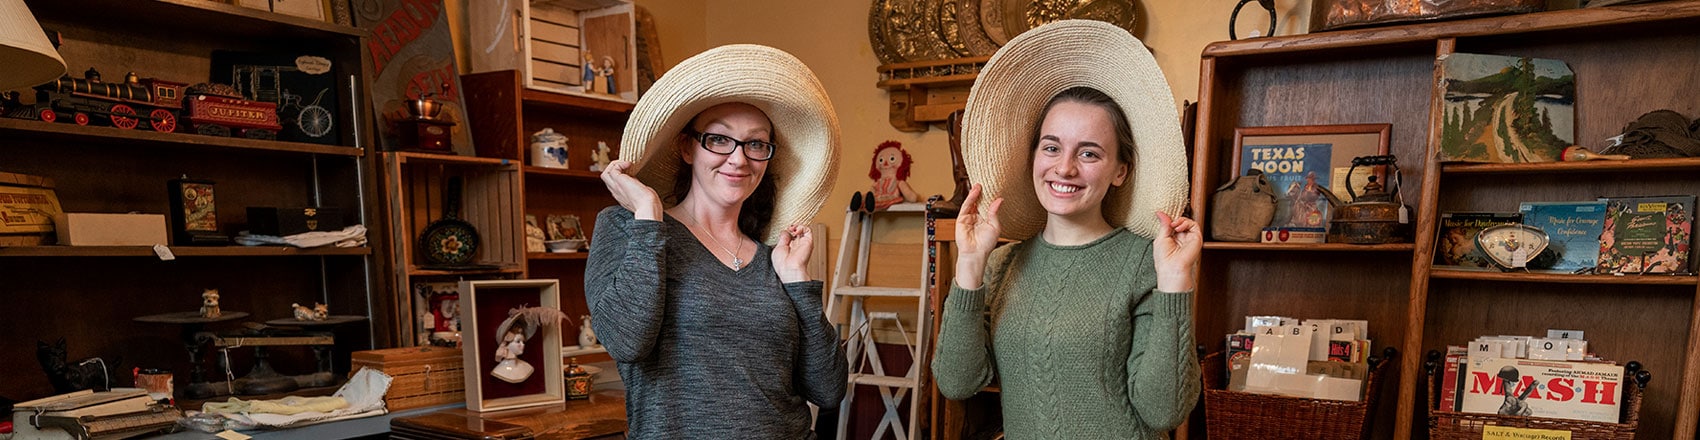 Two women smile for the camera in funny hats.